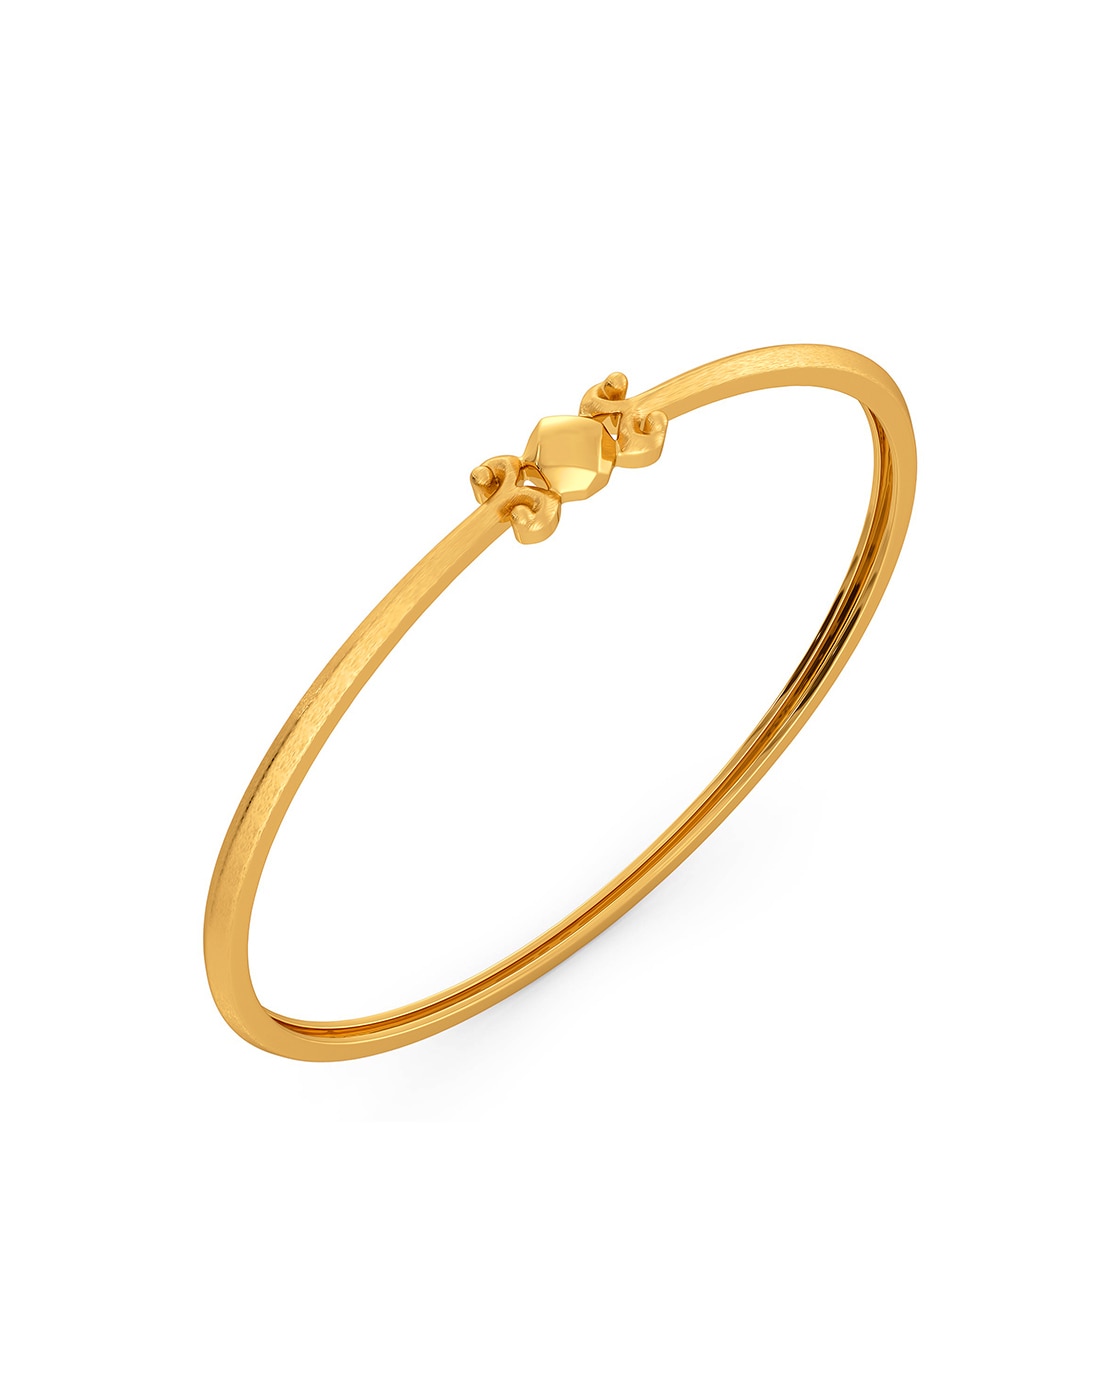 Discover more than 91 yellow gold bangle bracelet best - in.duhocakina